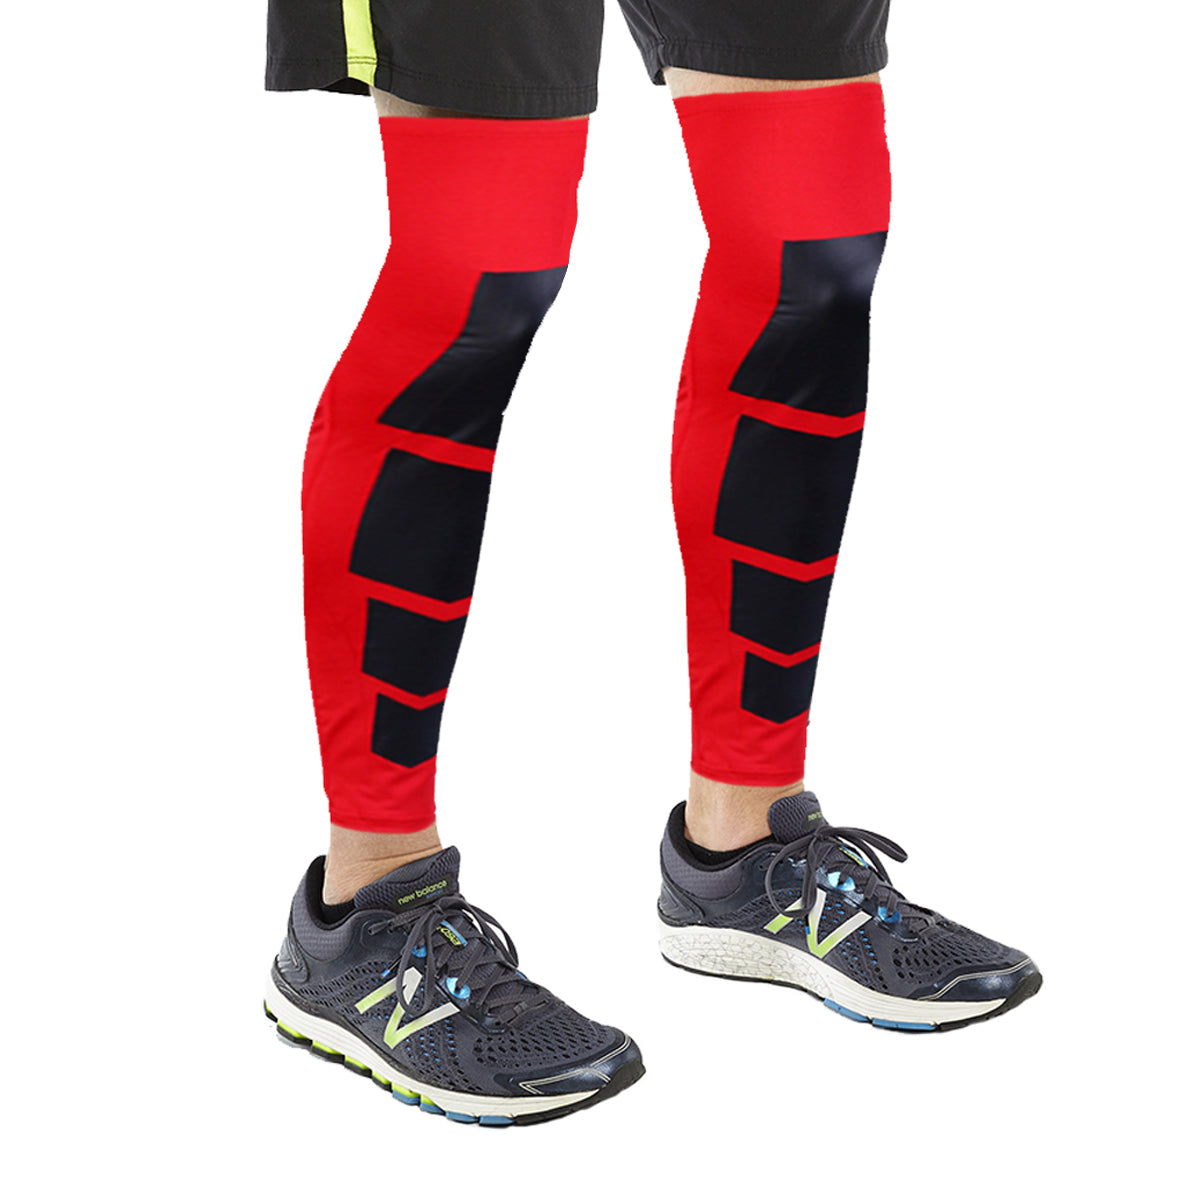 Full-Length Knee and Calf Compression Sleeves – Extreme Fit